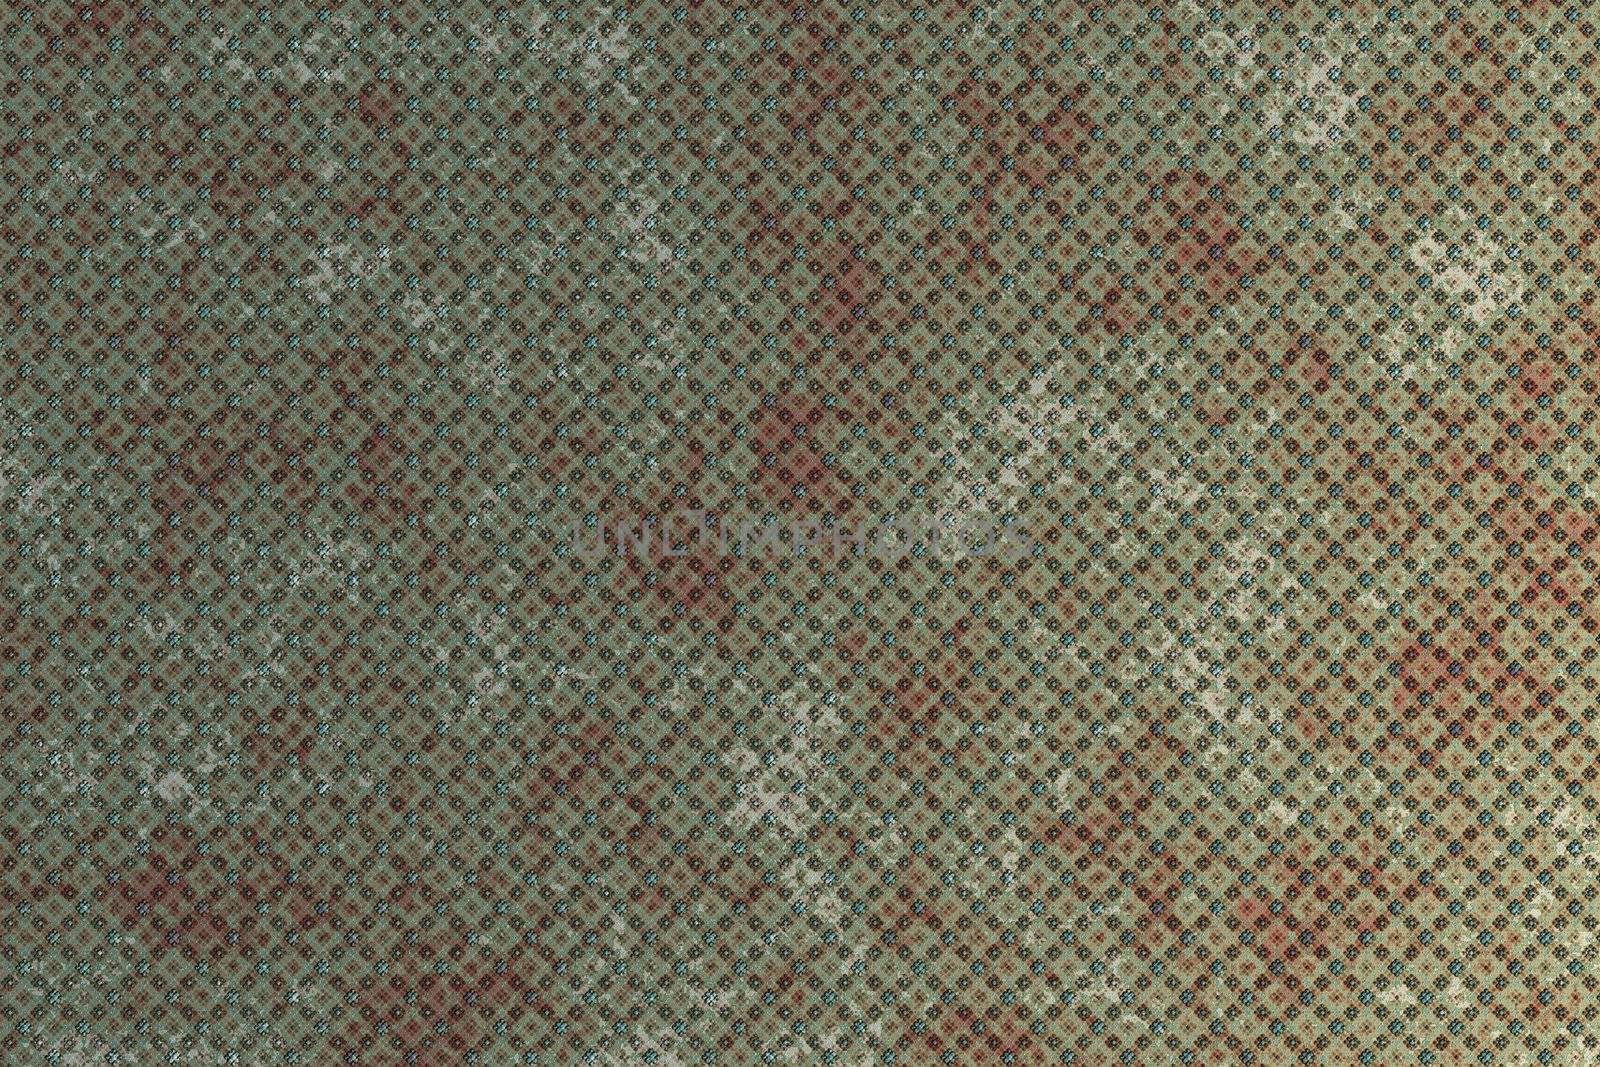 Brown and green stylized squares background